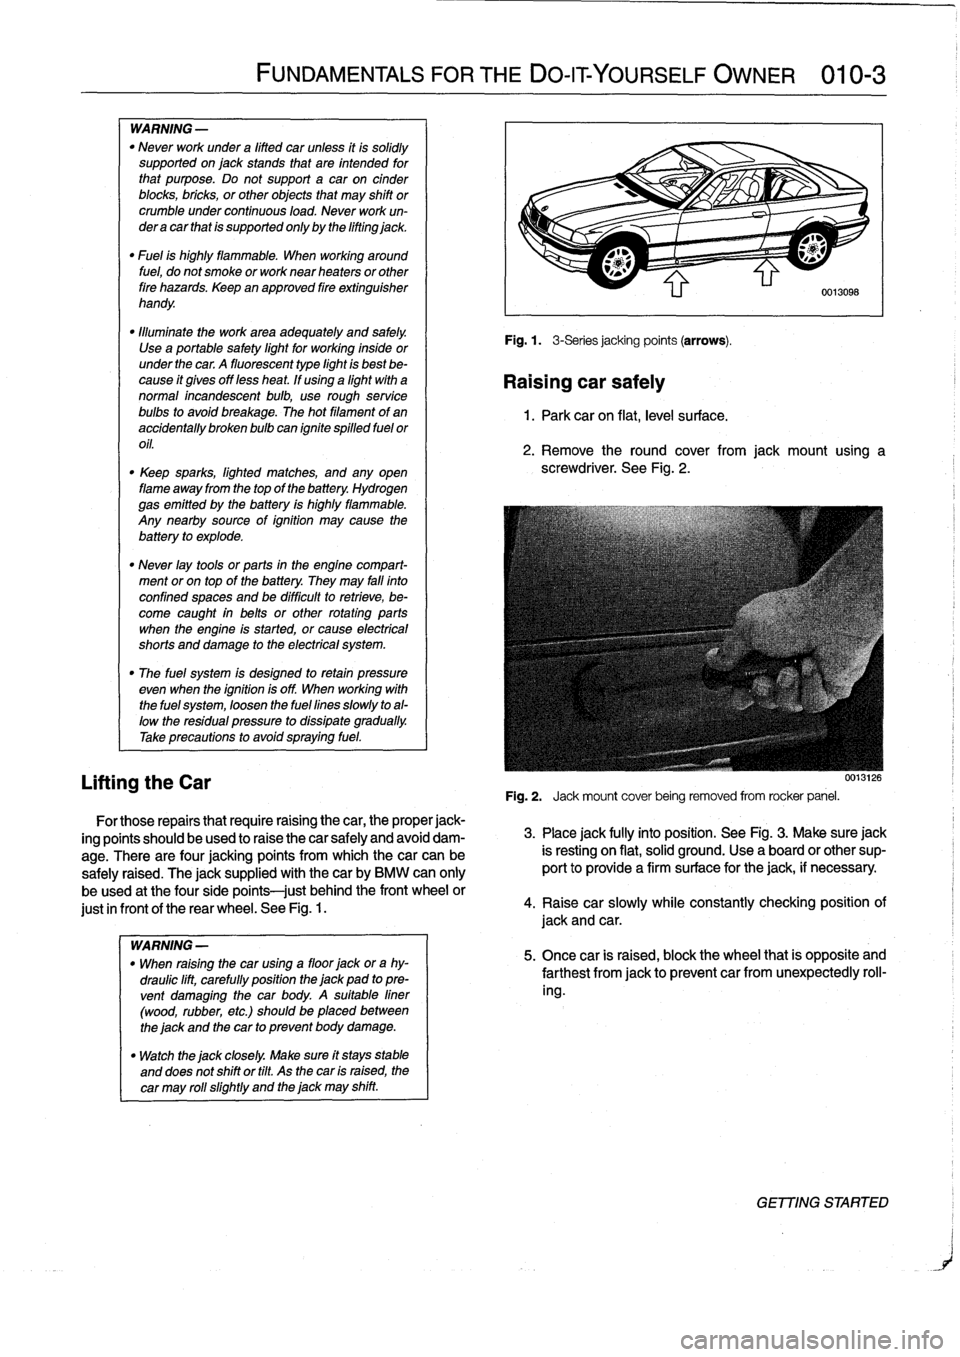 BMW 318i 1998 E36 Workshop Manual 
WARNING
-

"
Never
work
under
a
lifted
car
unless
it
is
solidly
supported
on
jack
stands
that
are
intended
for
that
purpose
.
Do
not
support
a
car
on
cinder
blocks,
bricks,
or
other
objects
that
may
